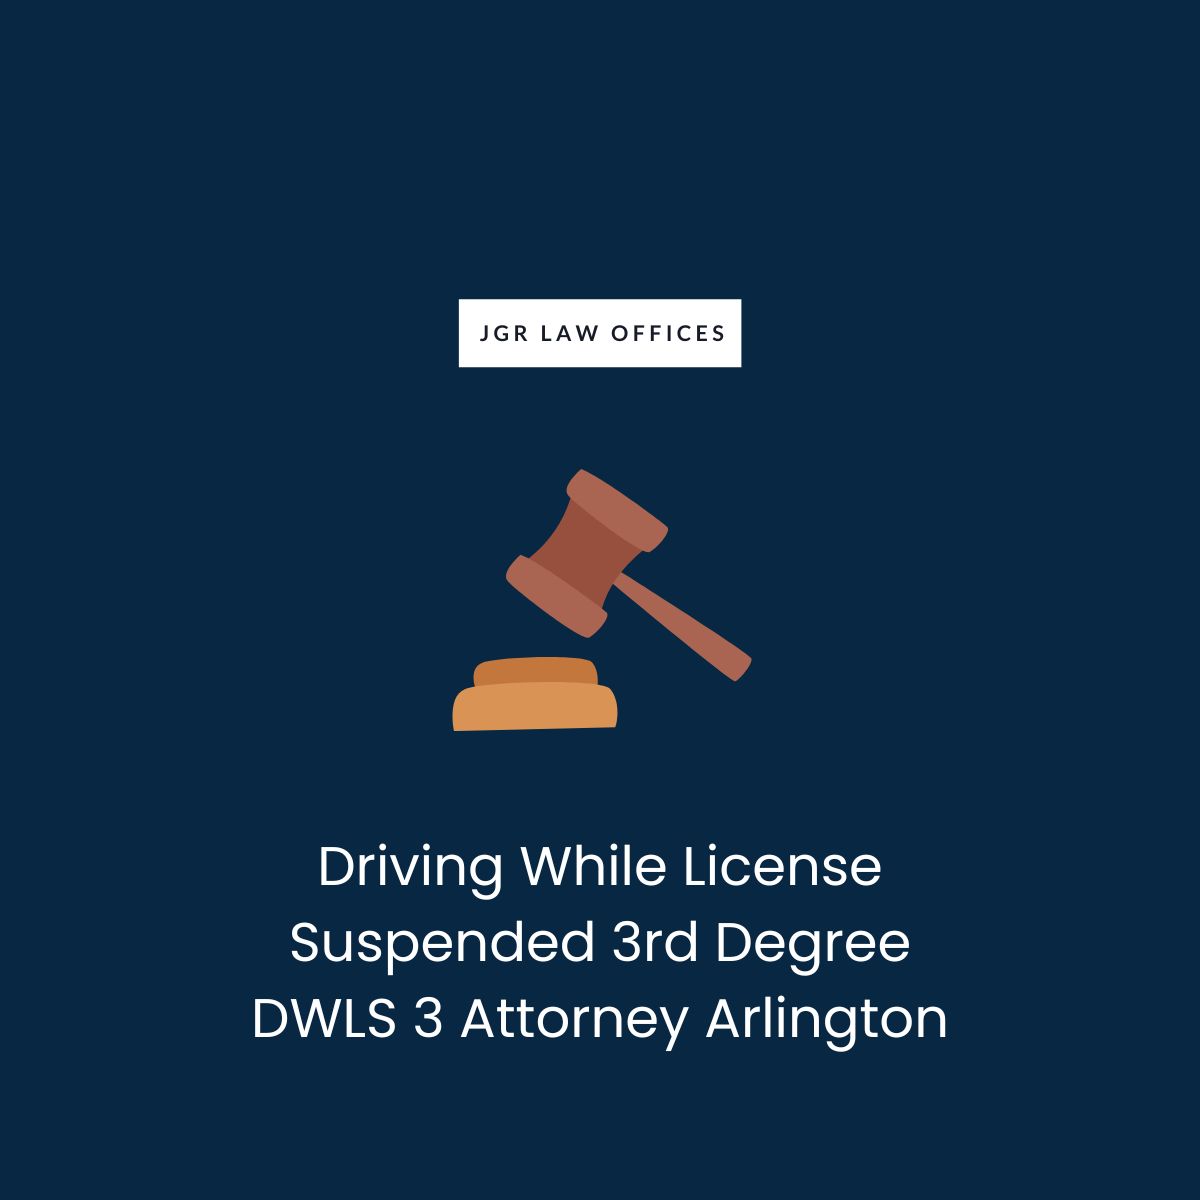 Driving While License Suspended 3rd Degree DWLS 3 Attorney Arlington